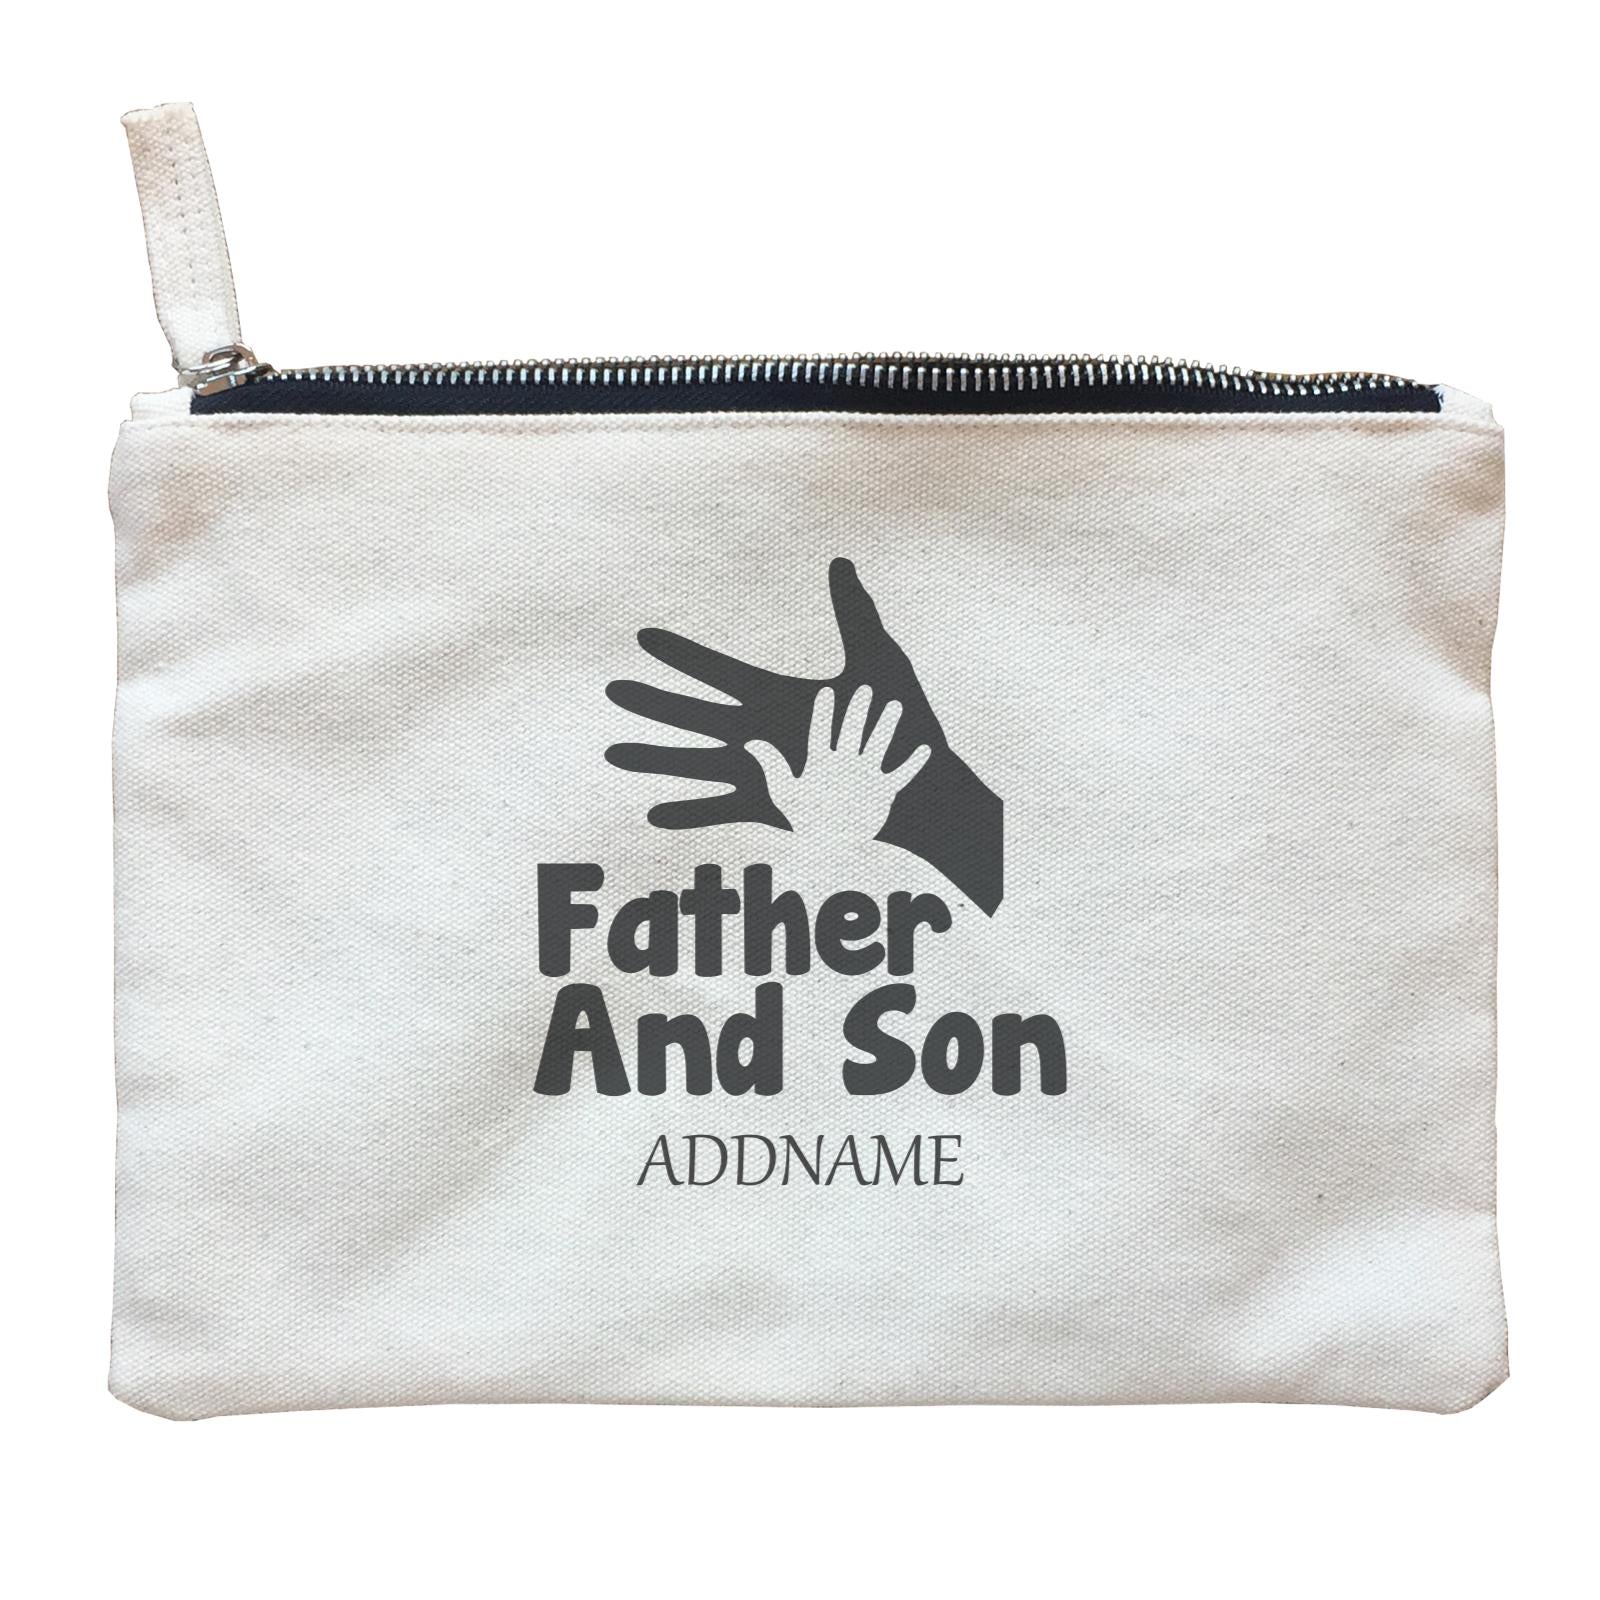 Hands Family Father And Son Addname Zipper Pouch